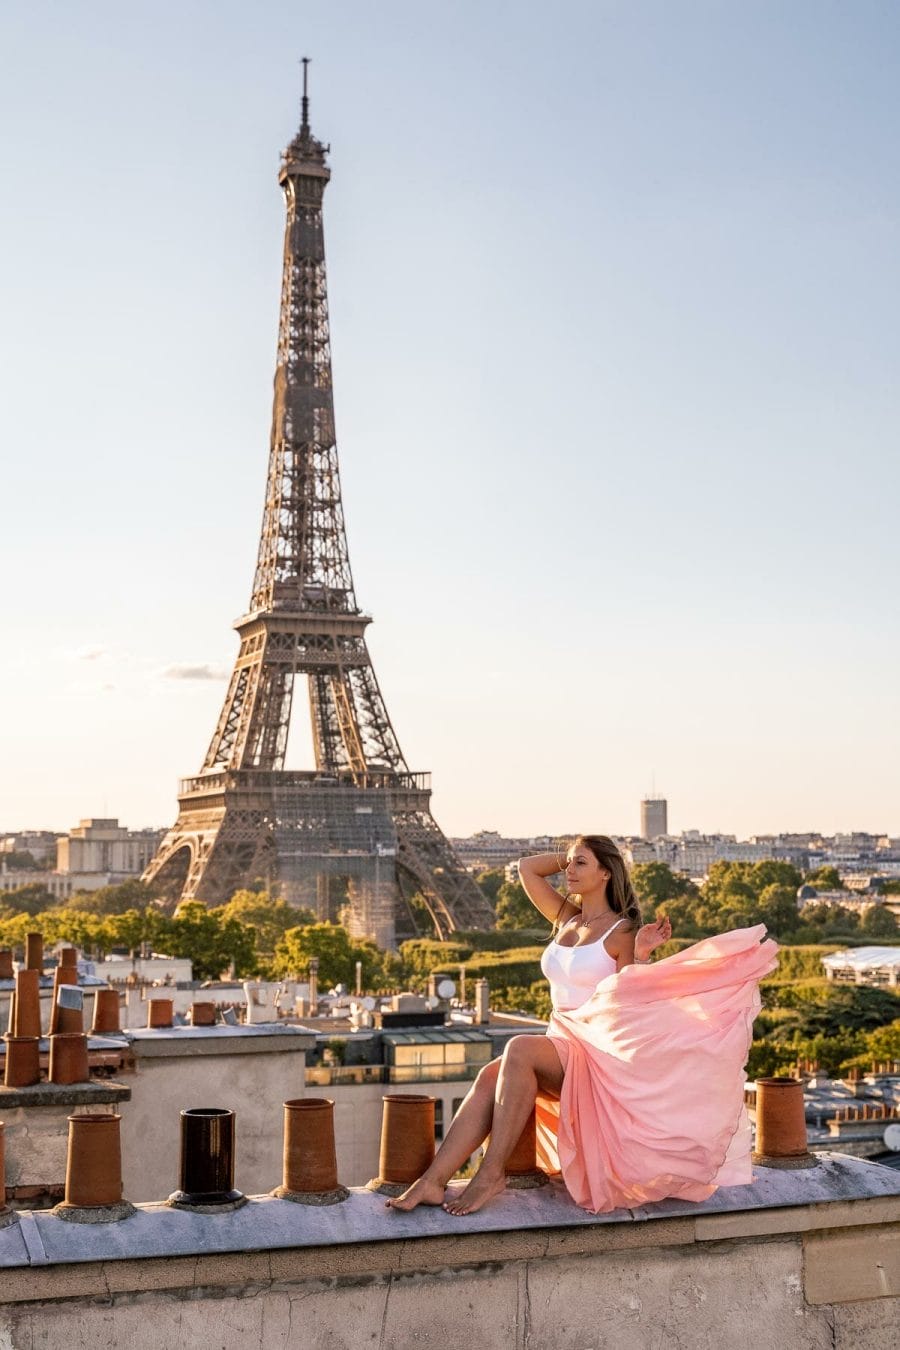 Girl in a pink skirt sitting on a rooftop in Paris with the Eiffel Tower in the background